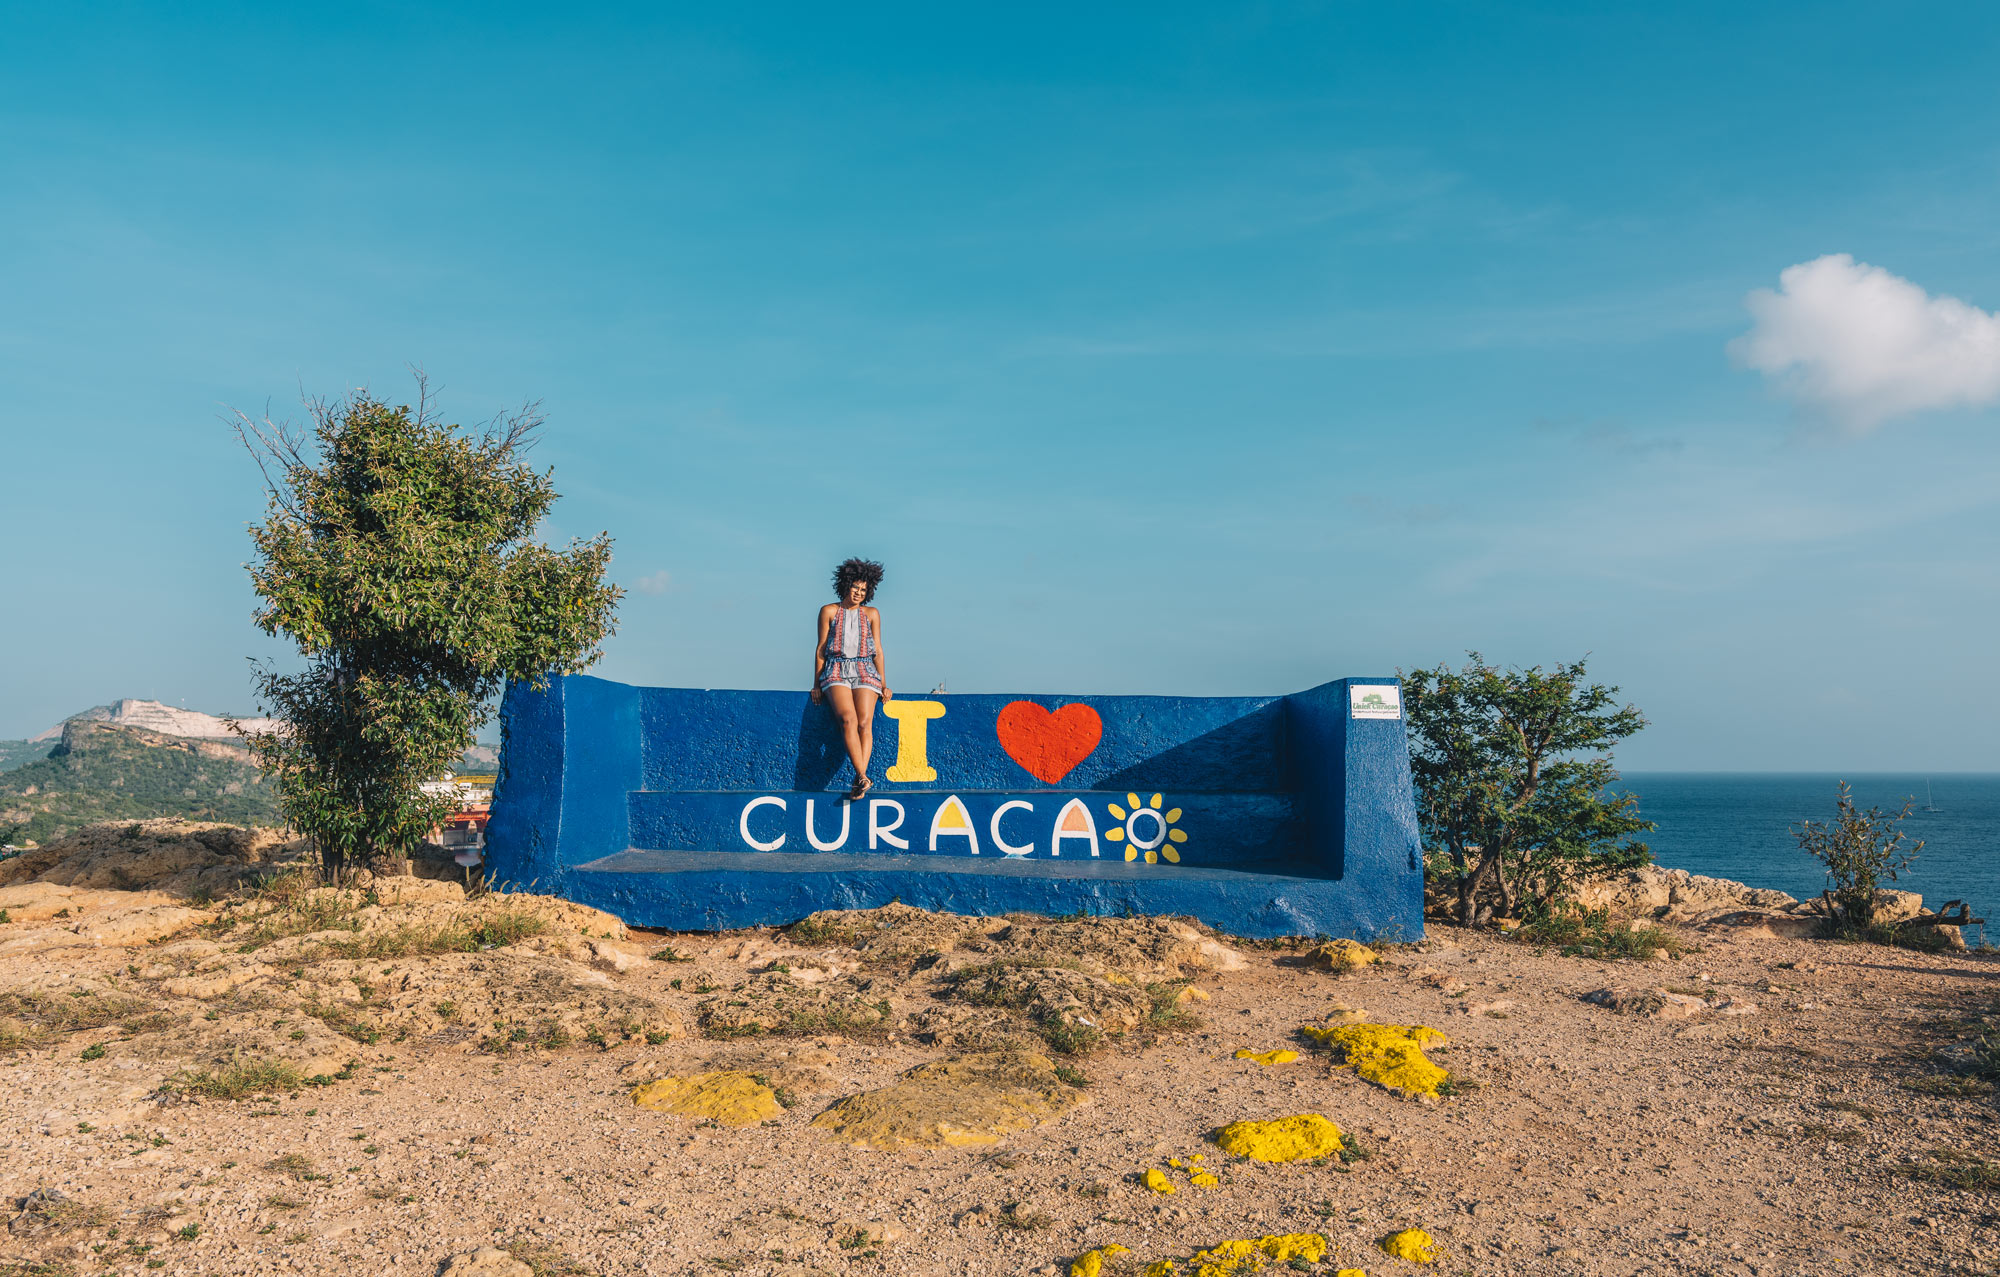 Curaçao stayover arrivals performance closer to a milestone in 2022